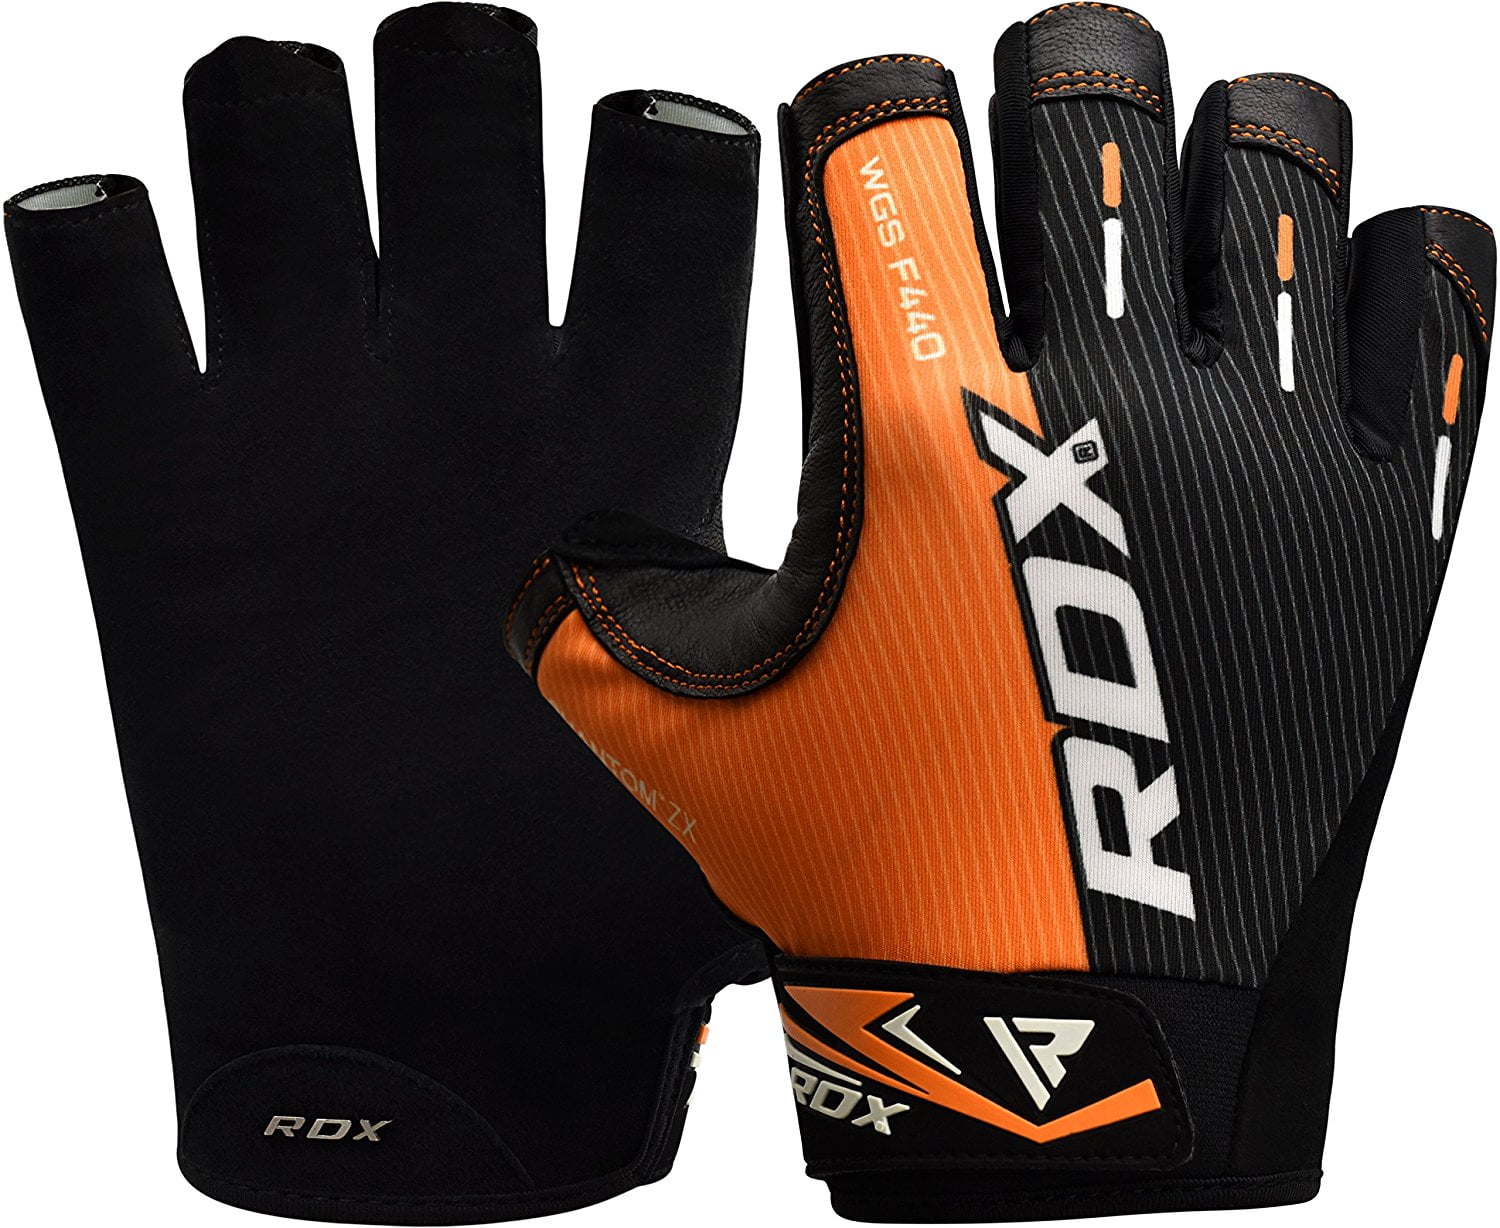 RDX F4 Exercise Weight Lifting Gym Gloves Training BodyBuilding WorkOut  Fitness 